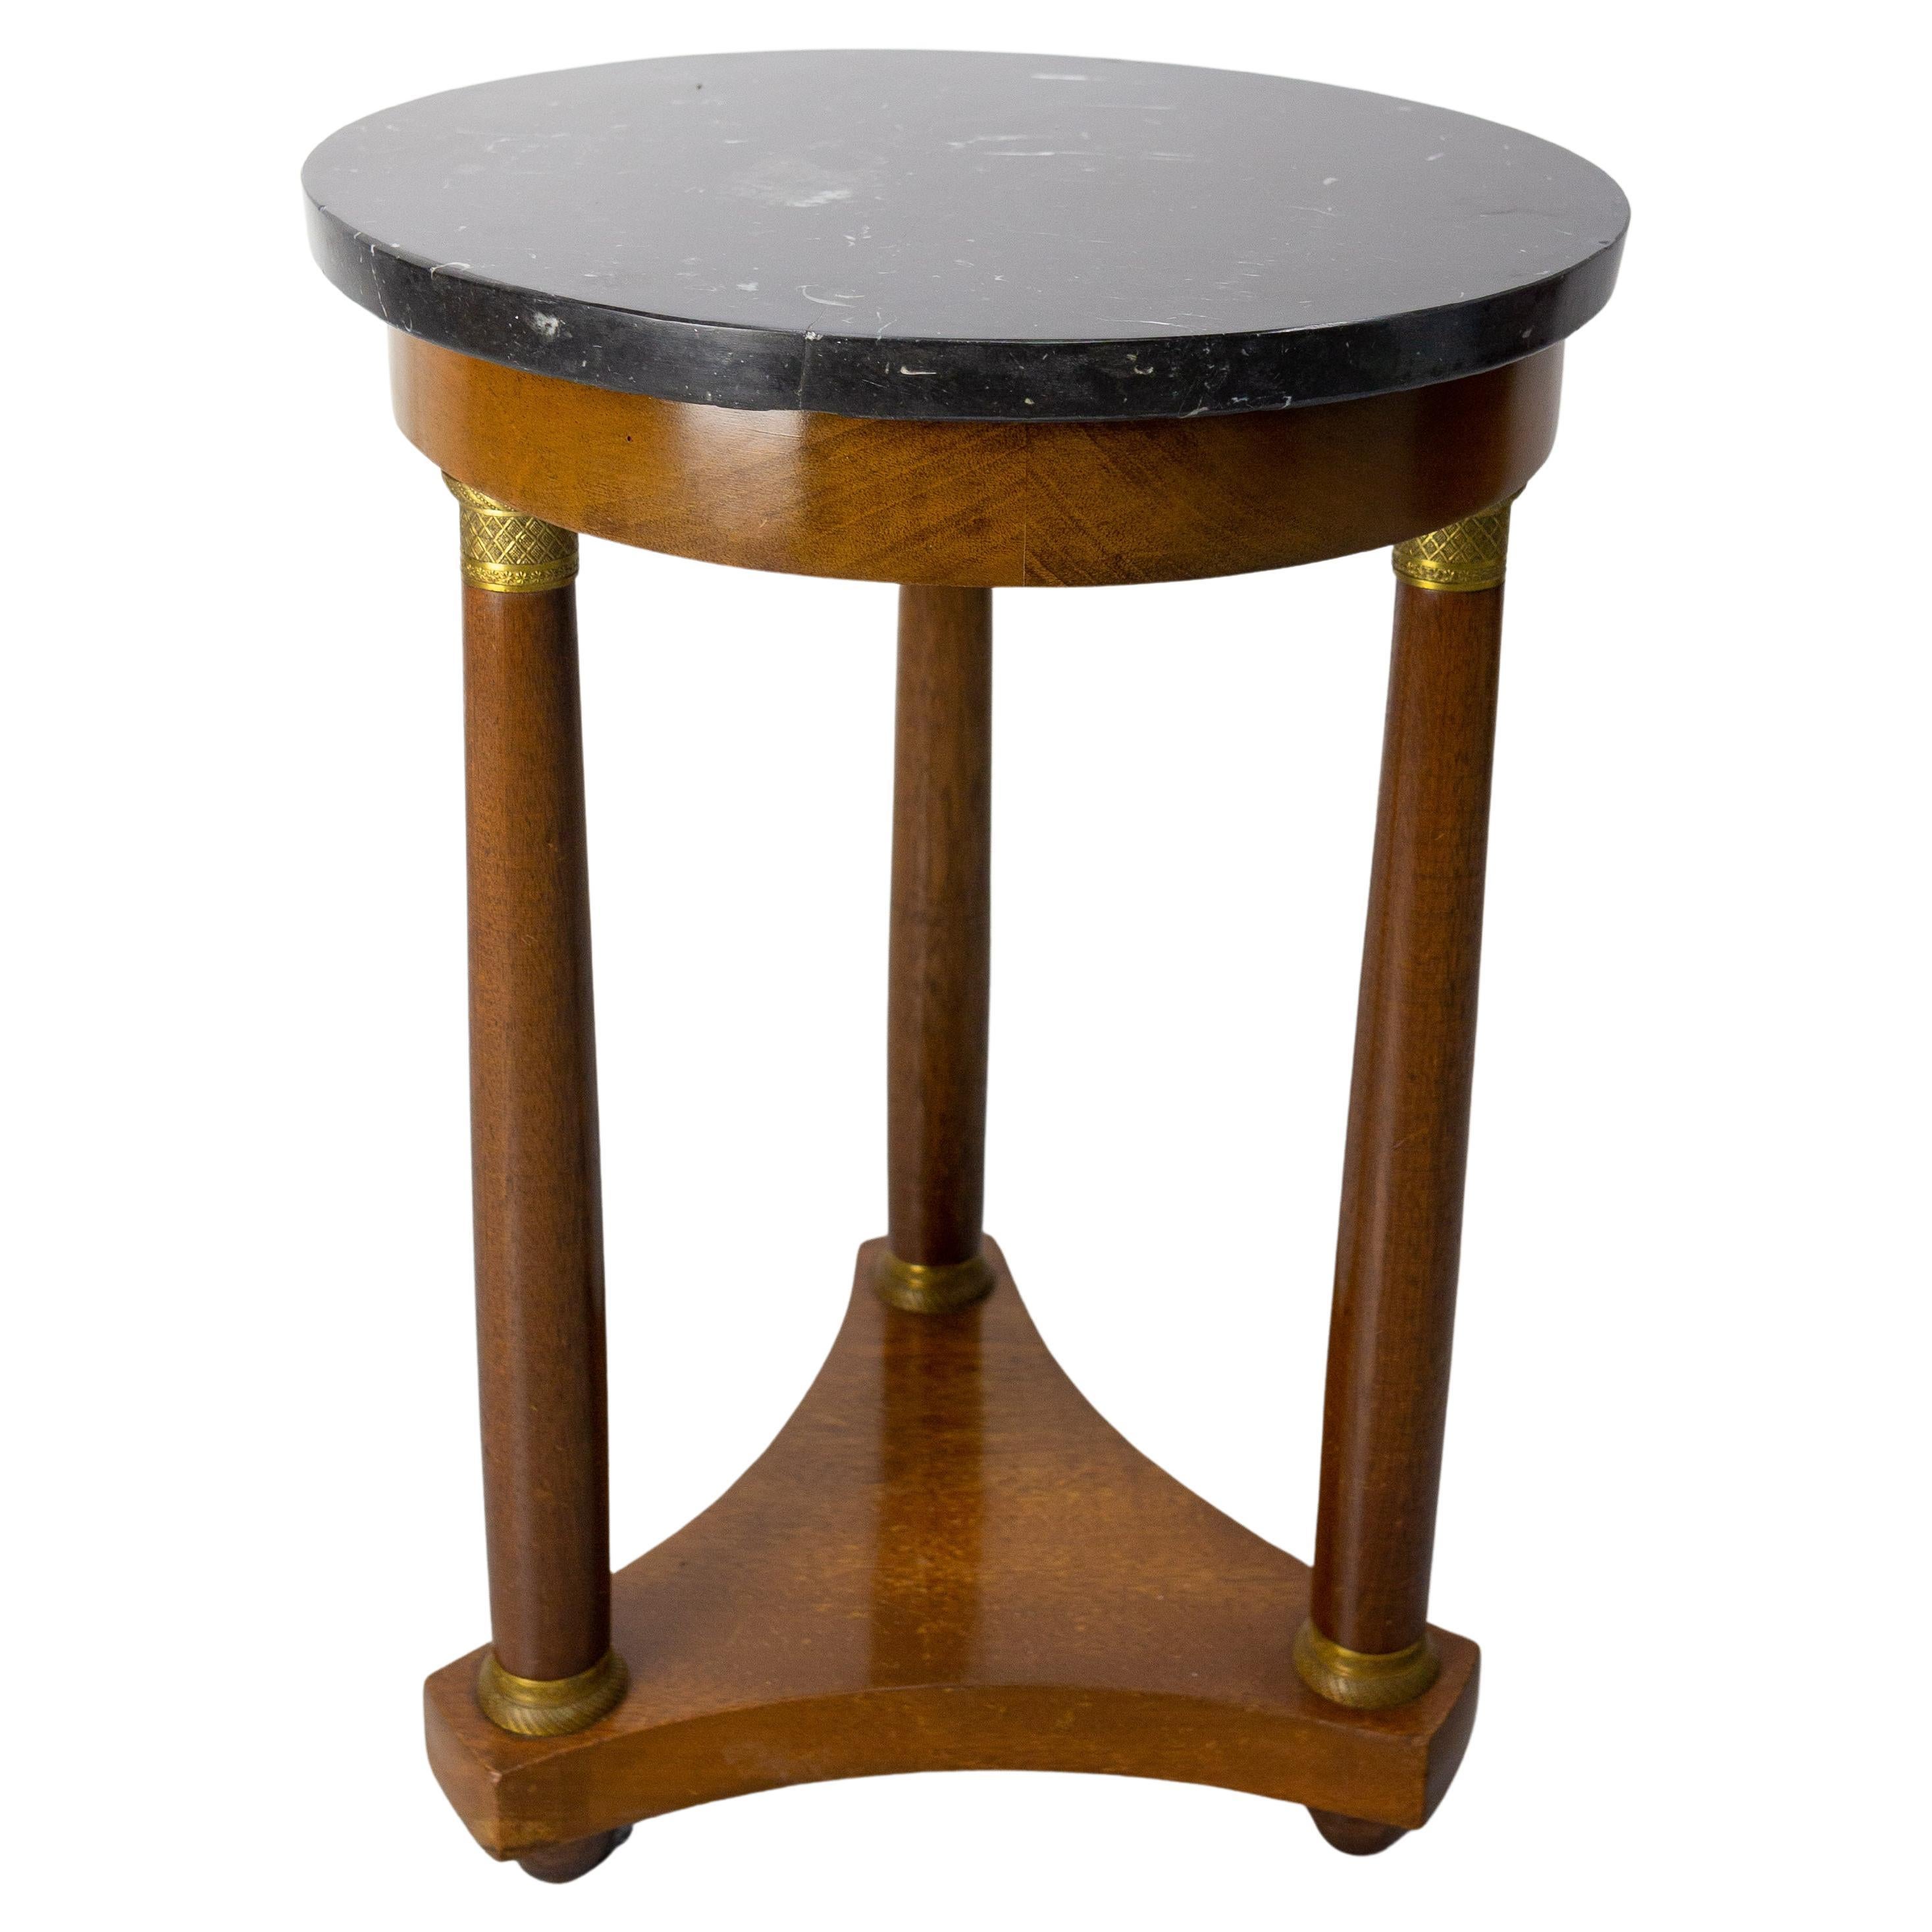 French 1960 Iroko & Marble Sellette or Plant Holder Three Legs Empire St, c 1960 For Sale